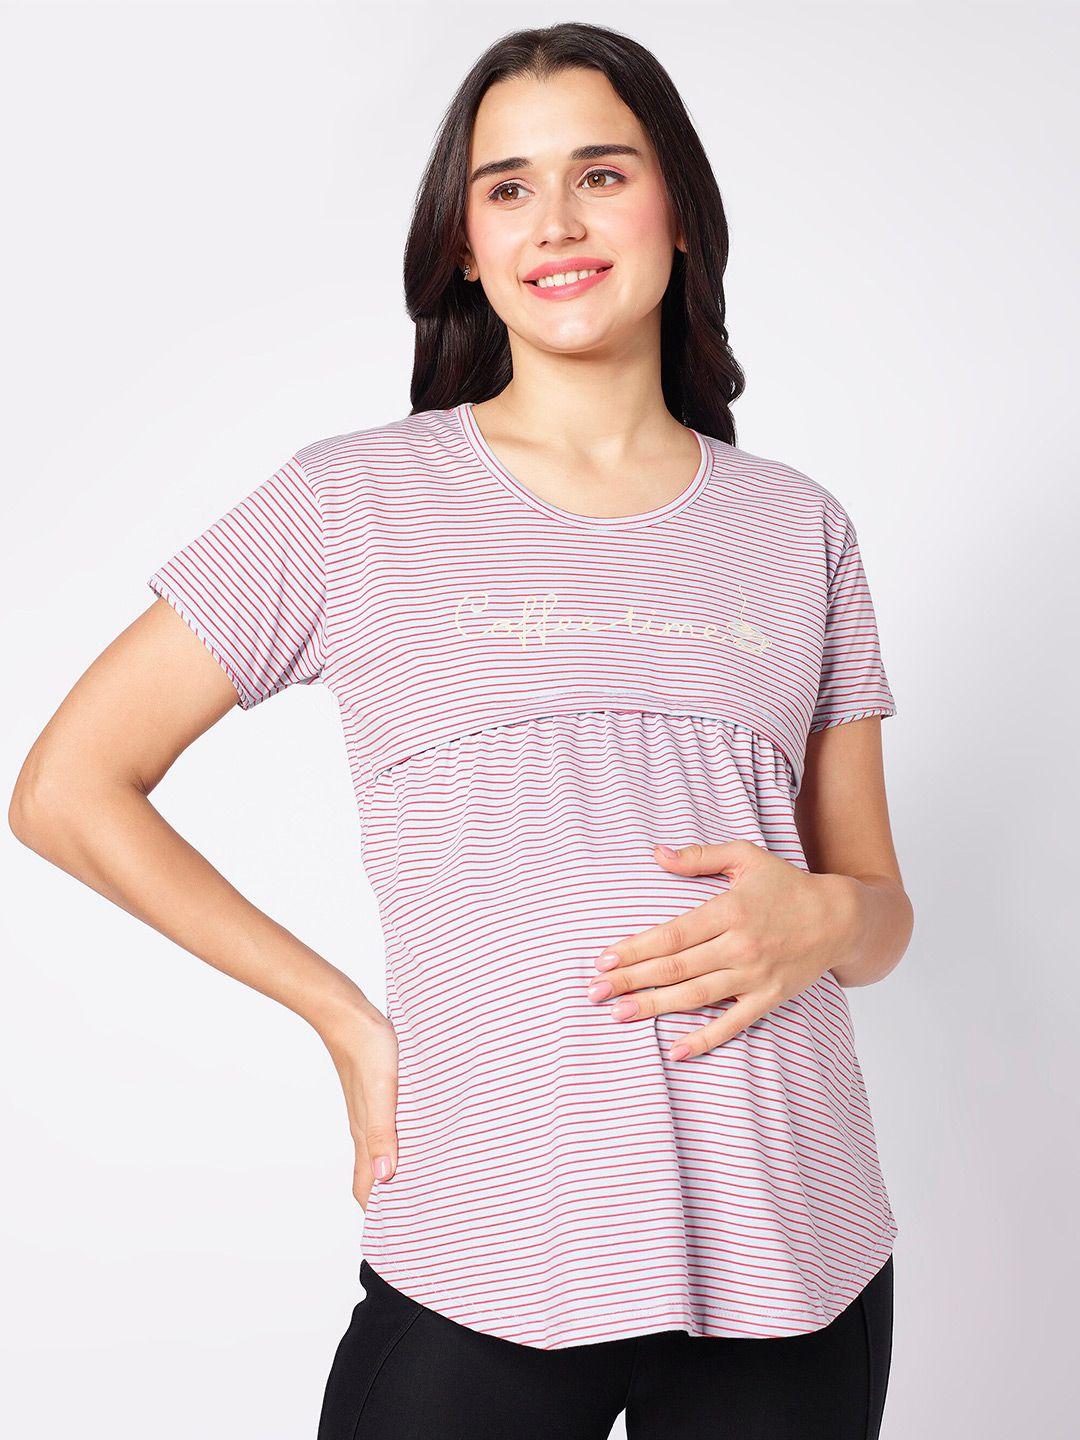 beebelle grey striped maternity top